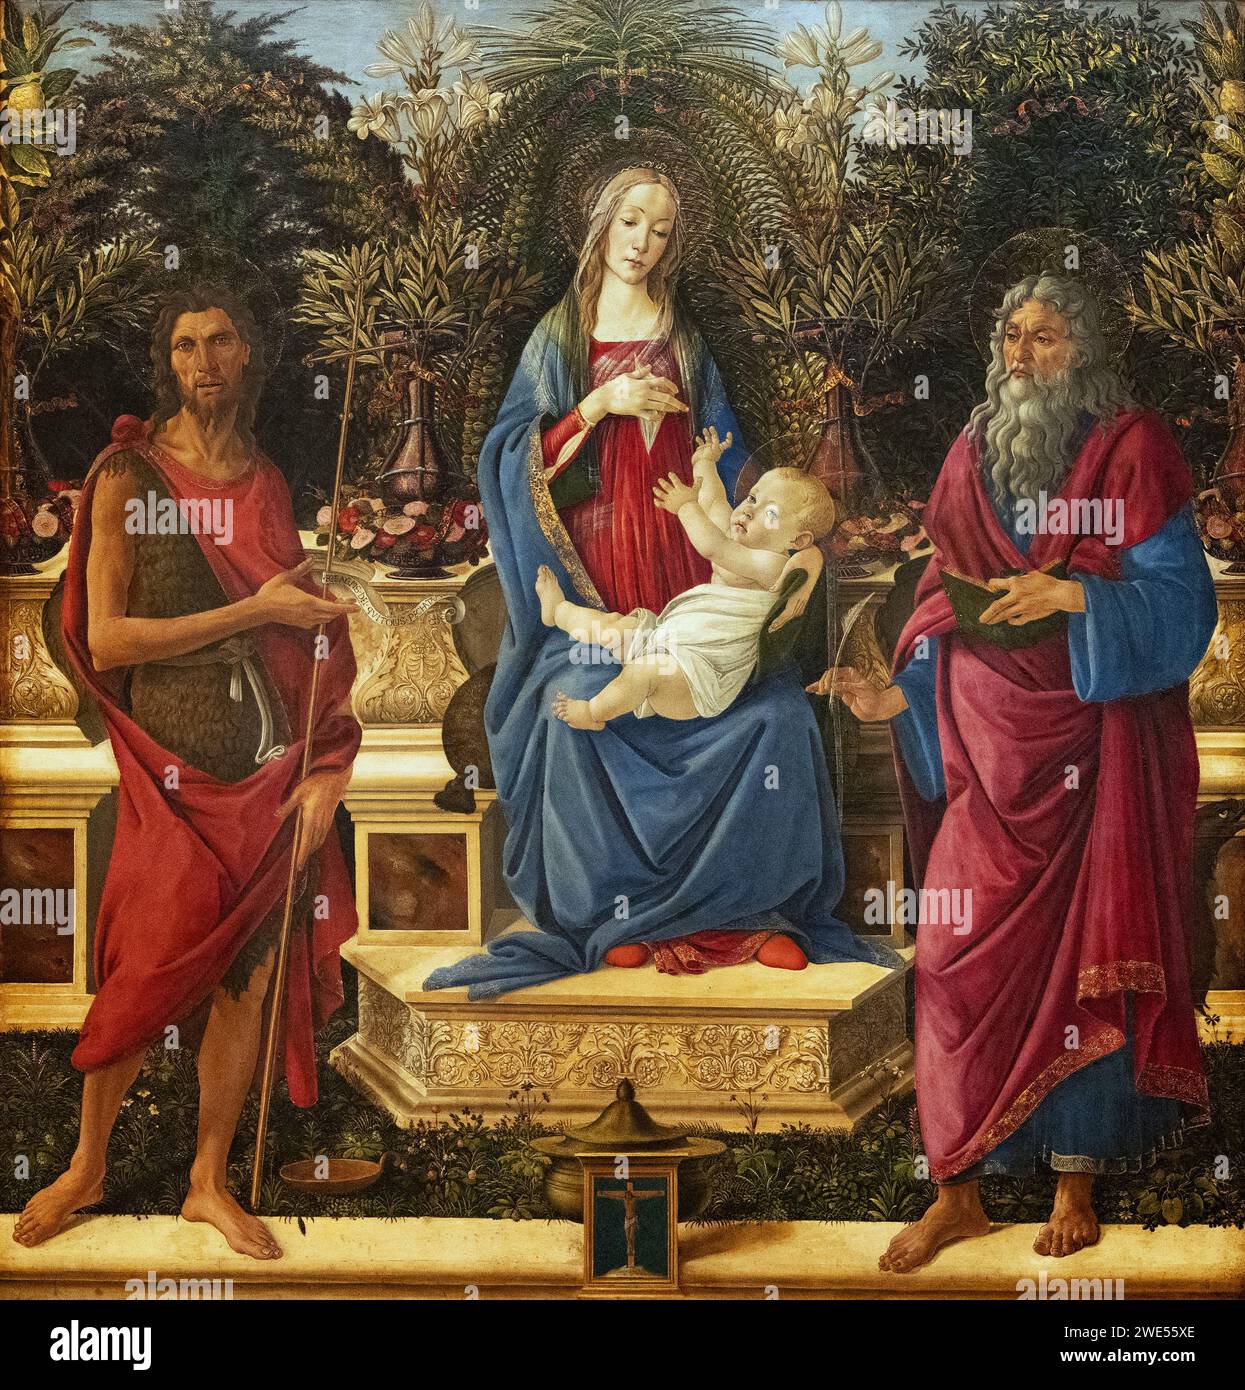 Sandro Botticelli painting; 'Mary enthroned with the Child and the Two Johns', originally from the 'Bardi altar' c 1484; Italian Renaissance art. Stock Photo